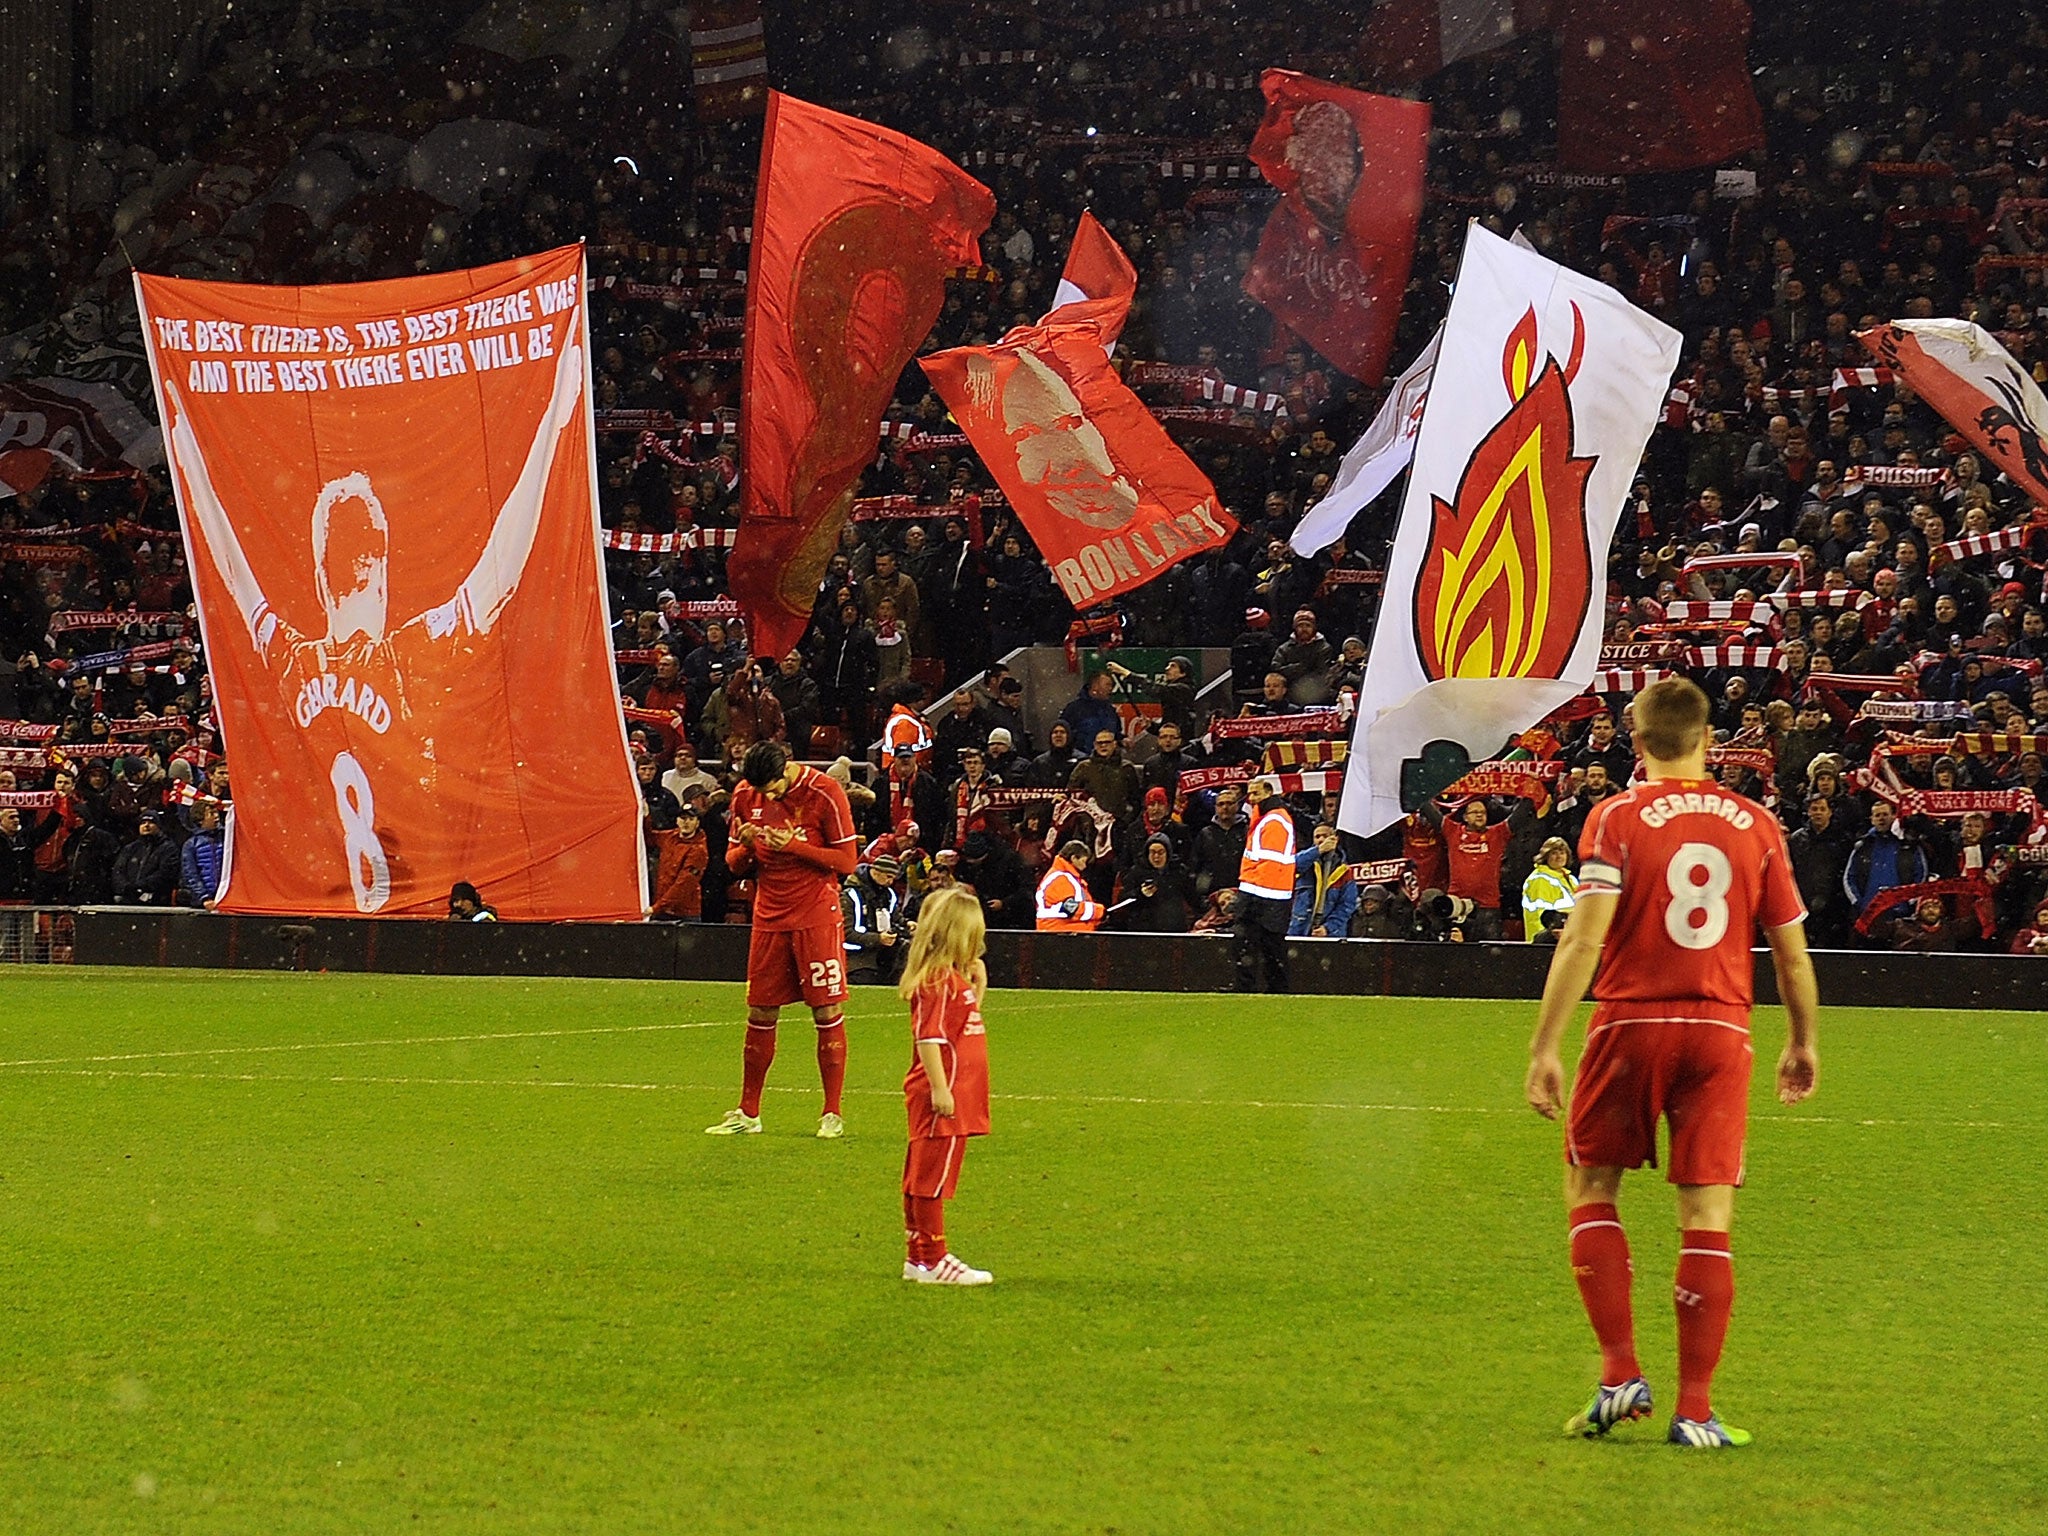 Steven Gerrard and his new banner